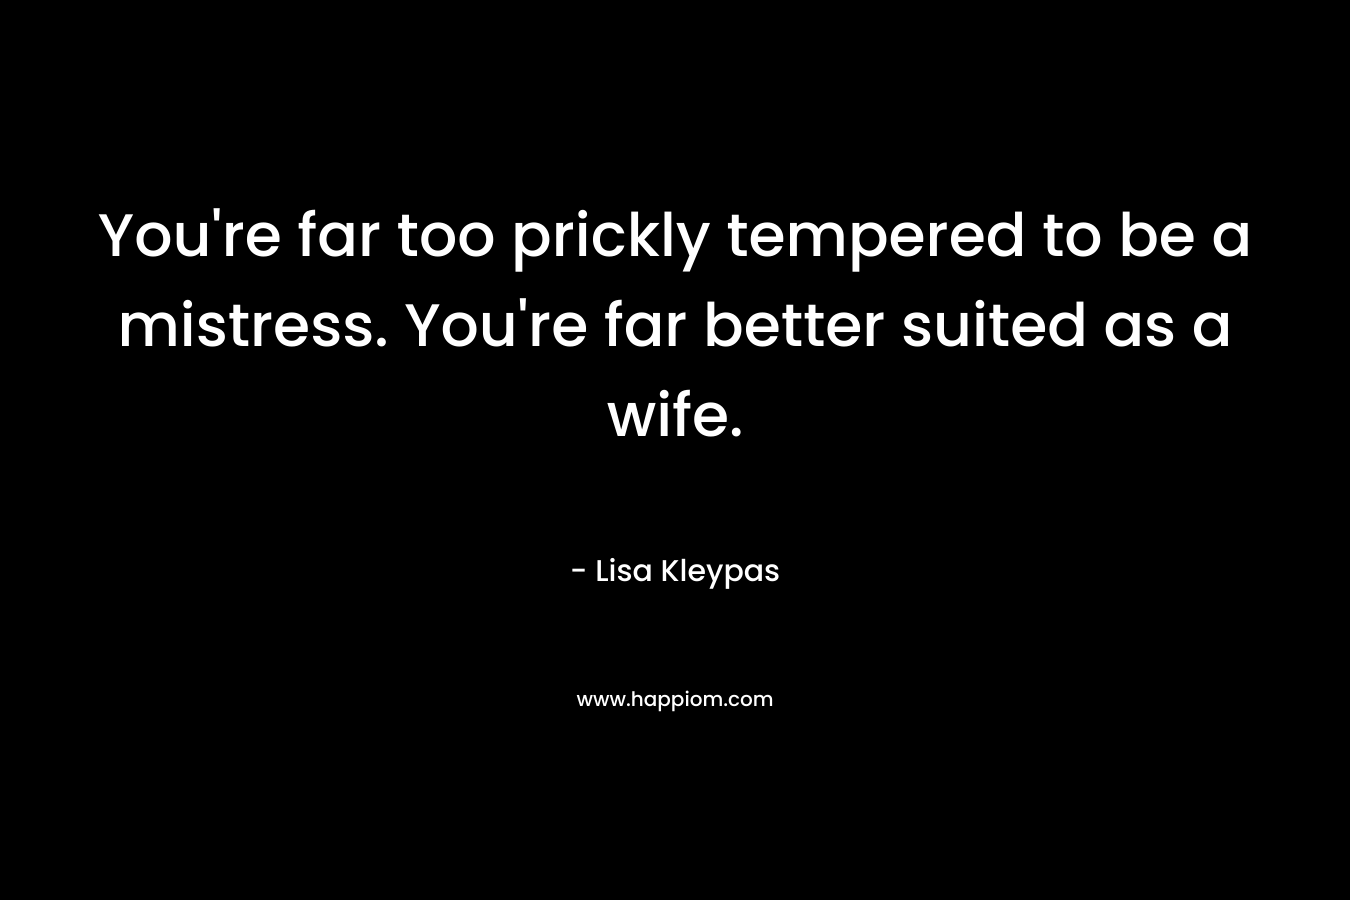 You're far too prickly tempered to be a mistress. You're far better suited as a wife.